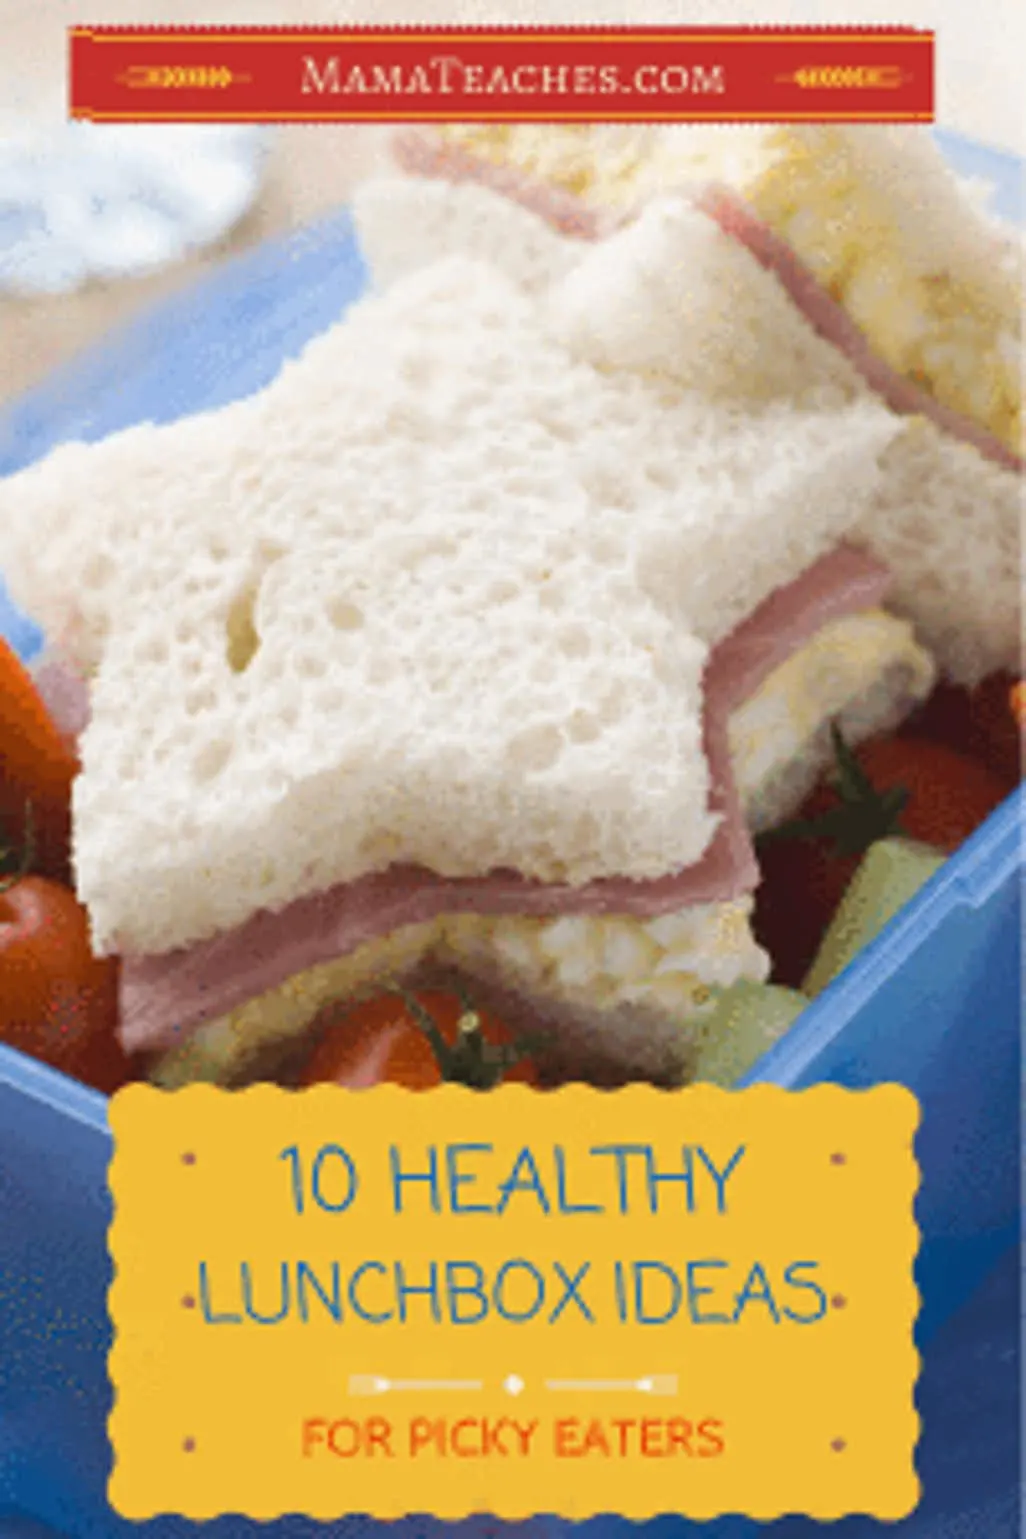 10 Healthy Lunchbox Ideas for Picky Eaters